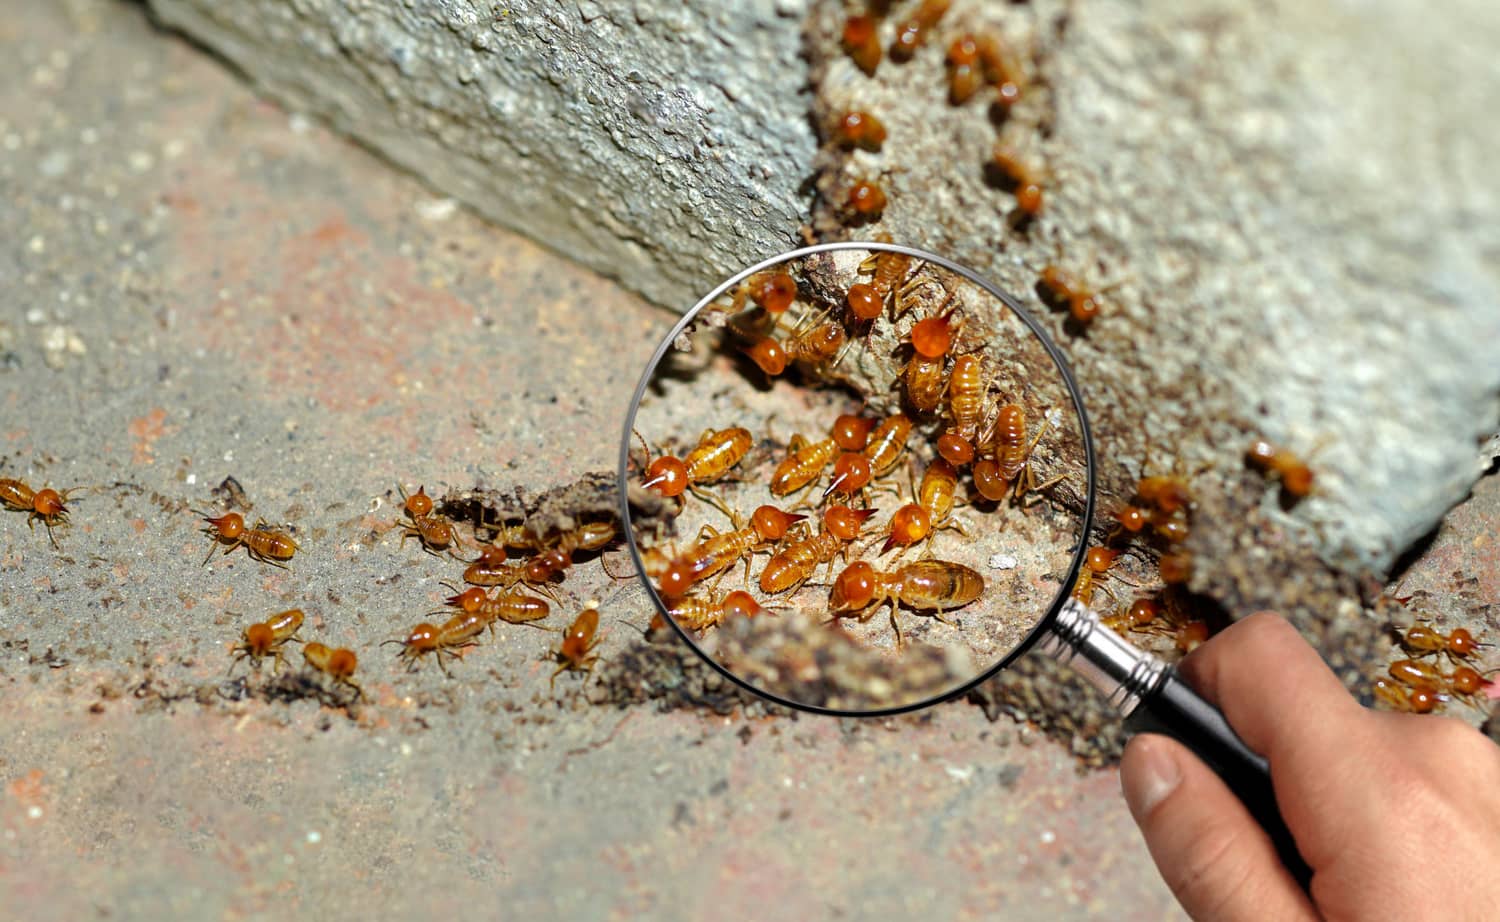 Where Do Termites Come From